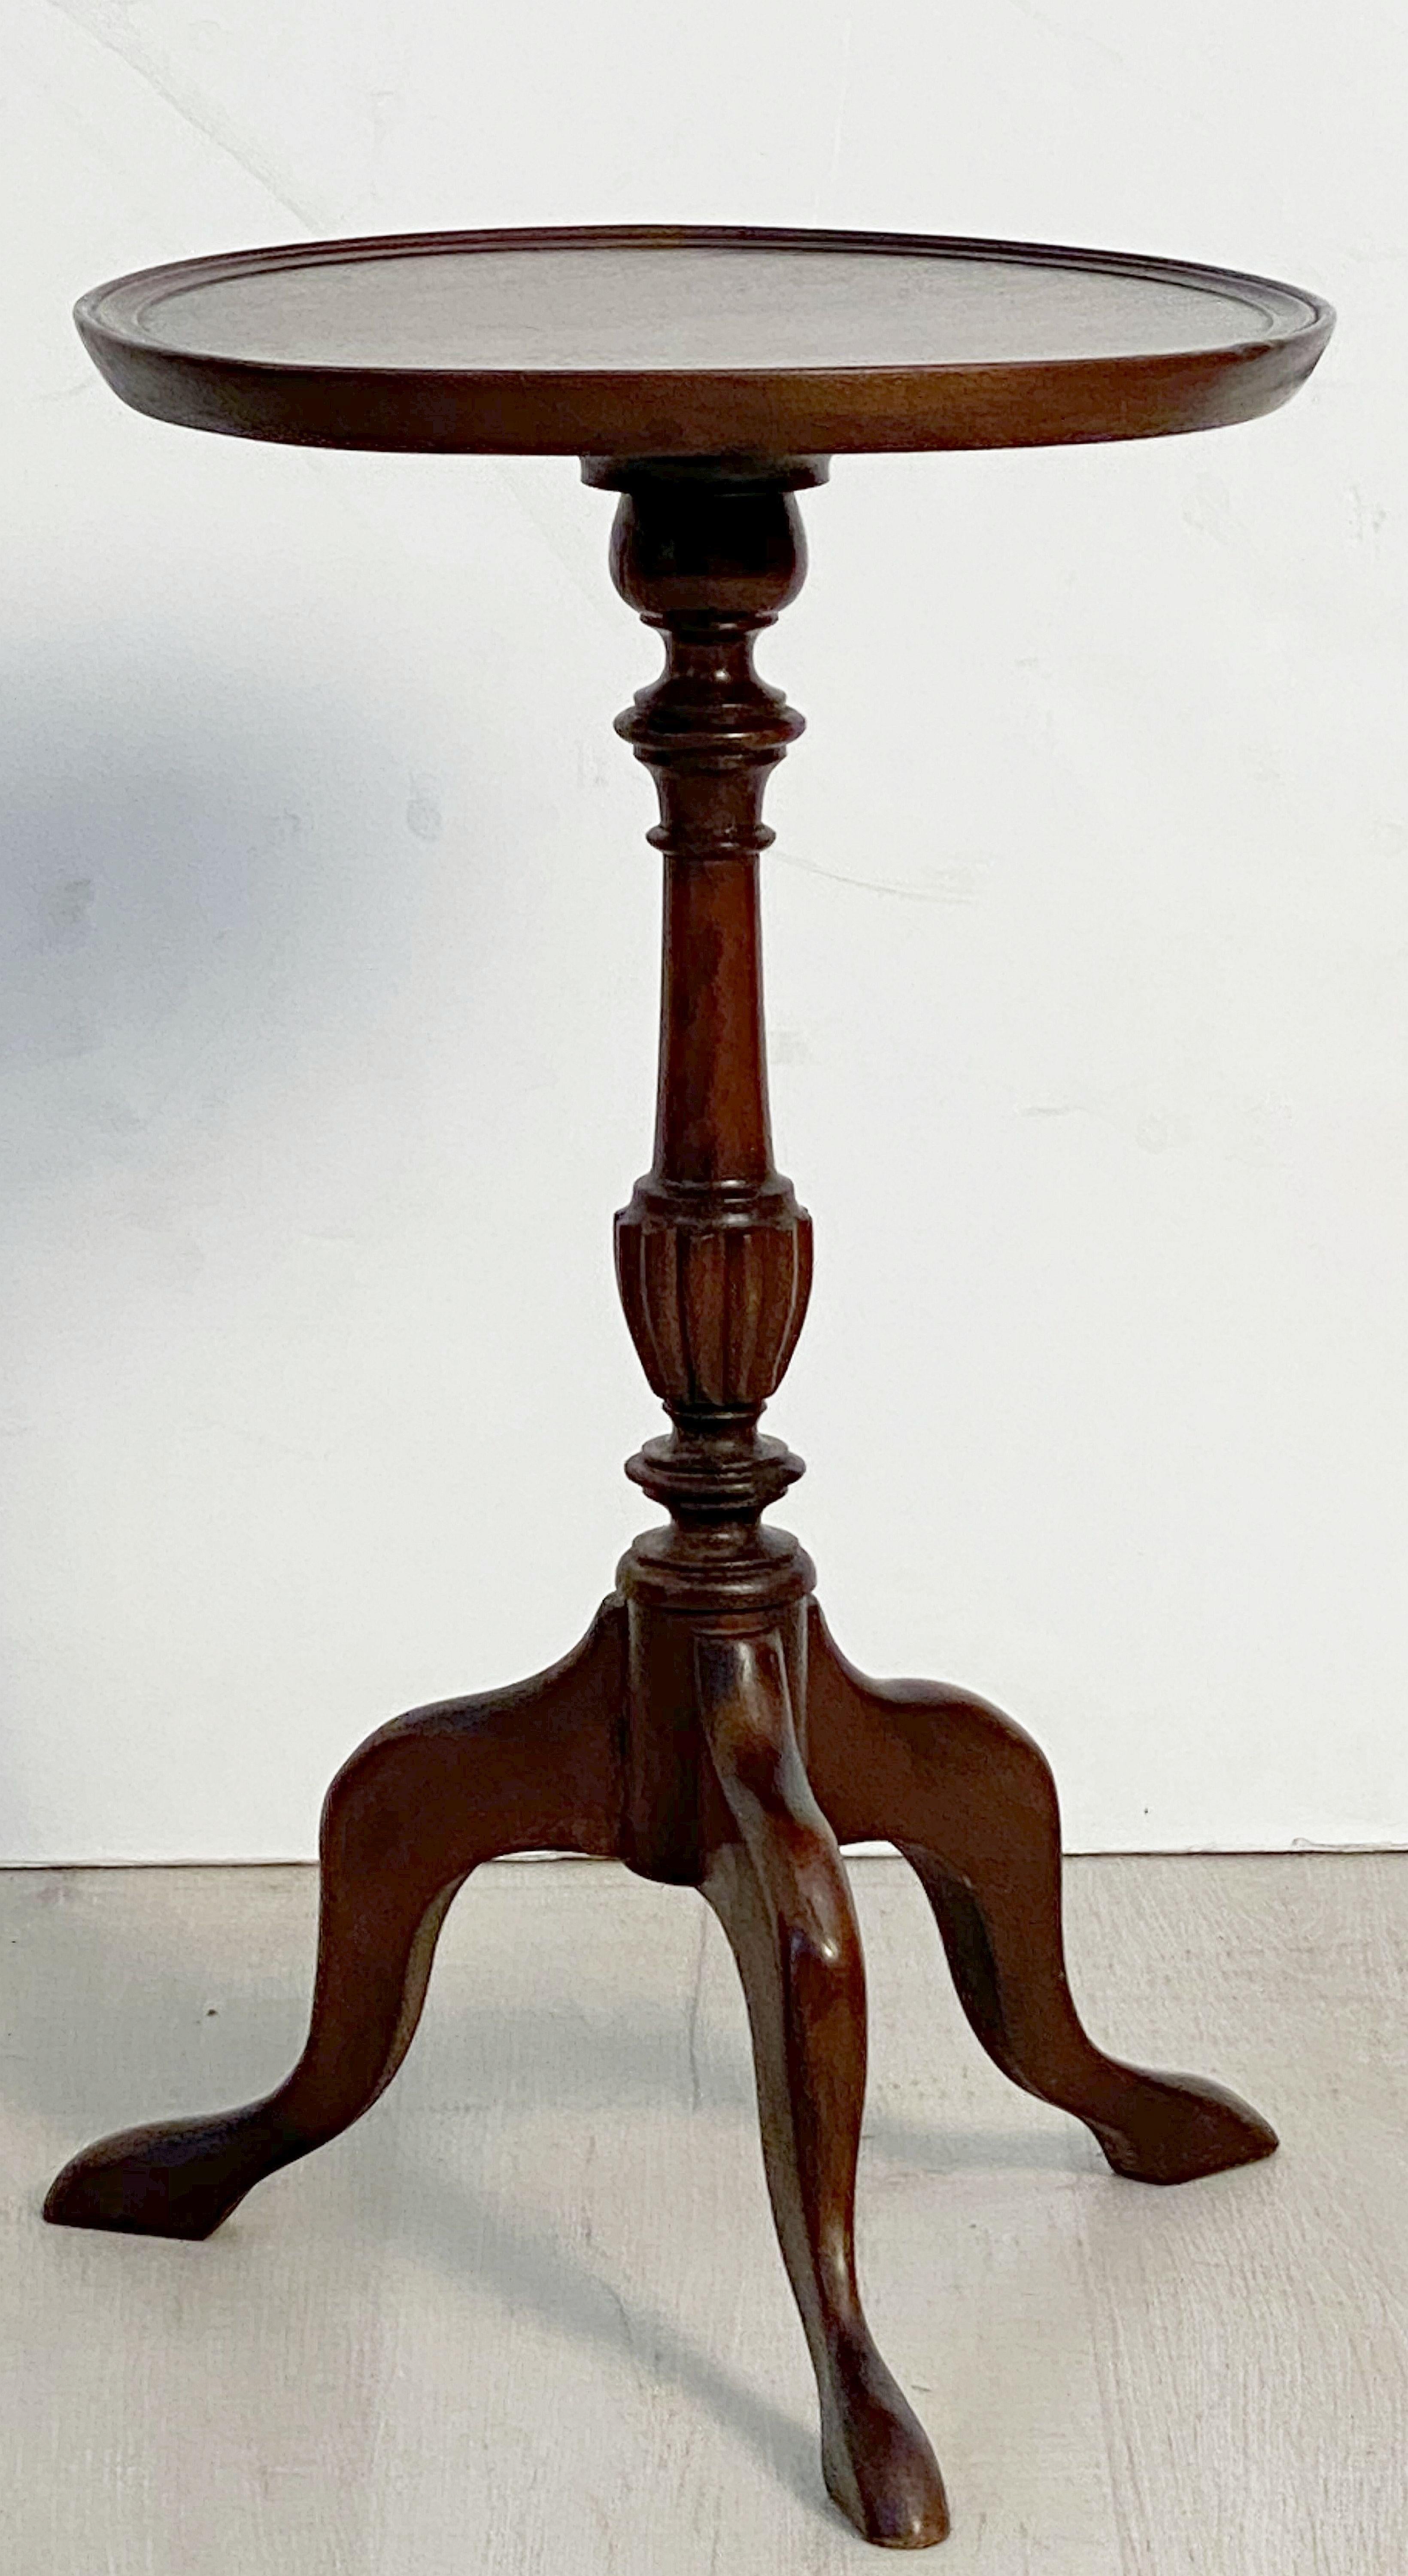 An English wine table of mahogany from the Edwardian era, featuring a raised edge around the circumference of the round, moulded top, mounted upon a turned column pedestal with tripod base. 

An excellent choice as a side table or for serving.